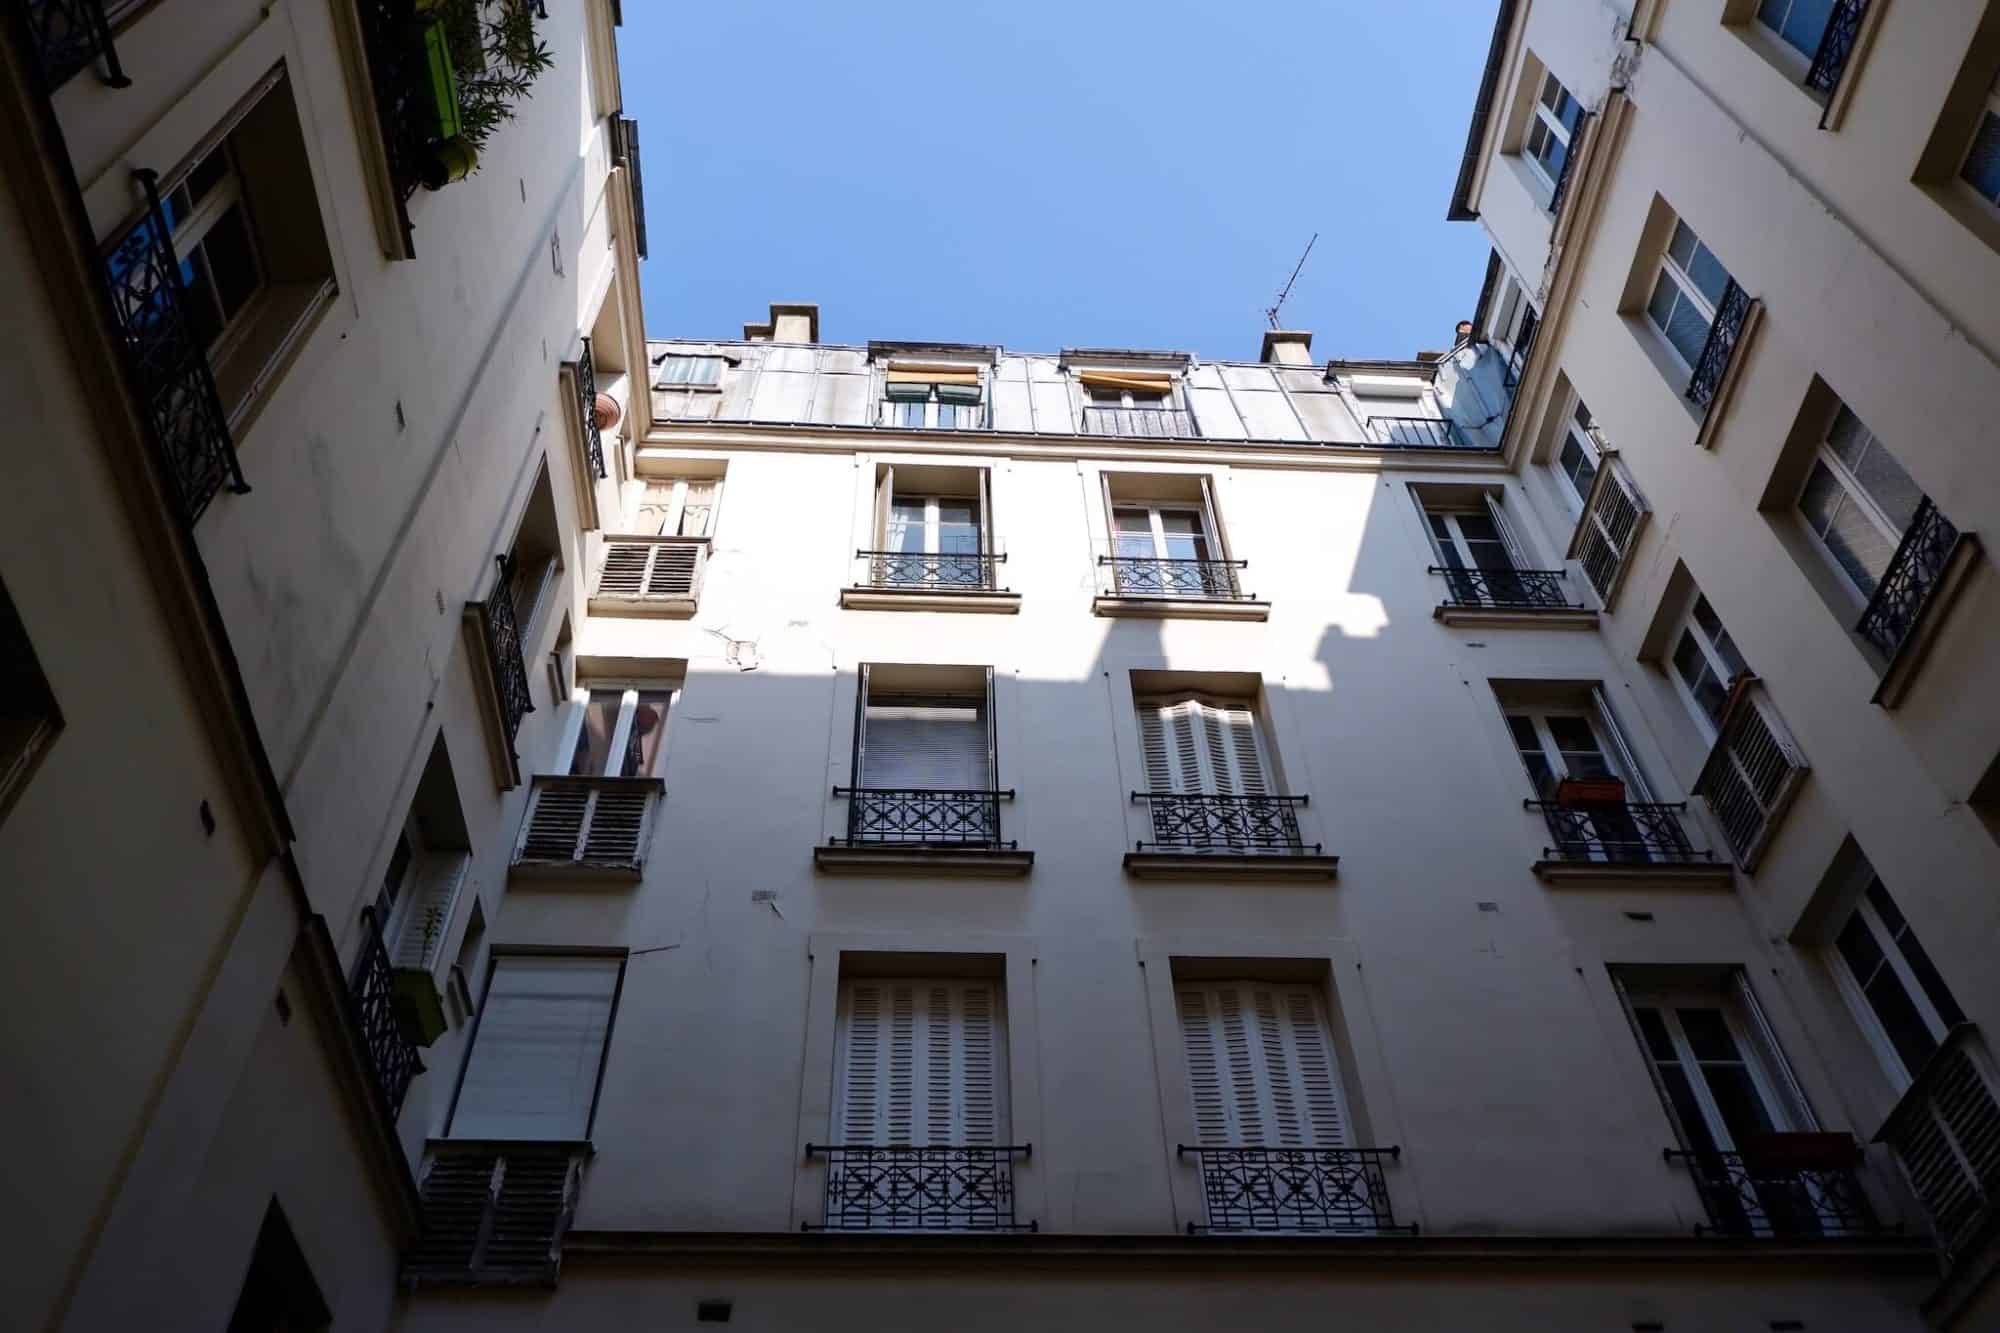 The courtyard view of Ali's Paris apartment, sunlight cast at the top of the building. 